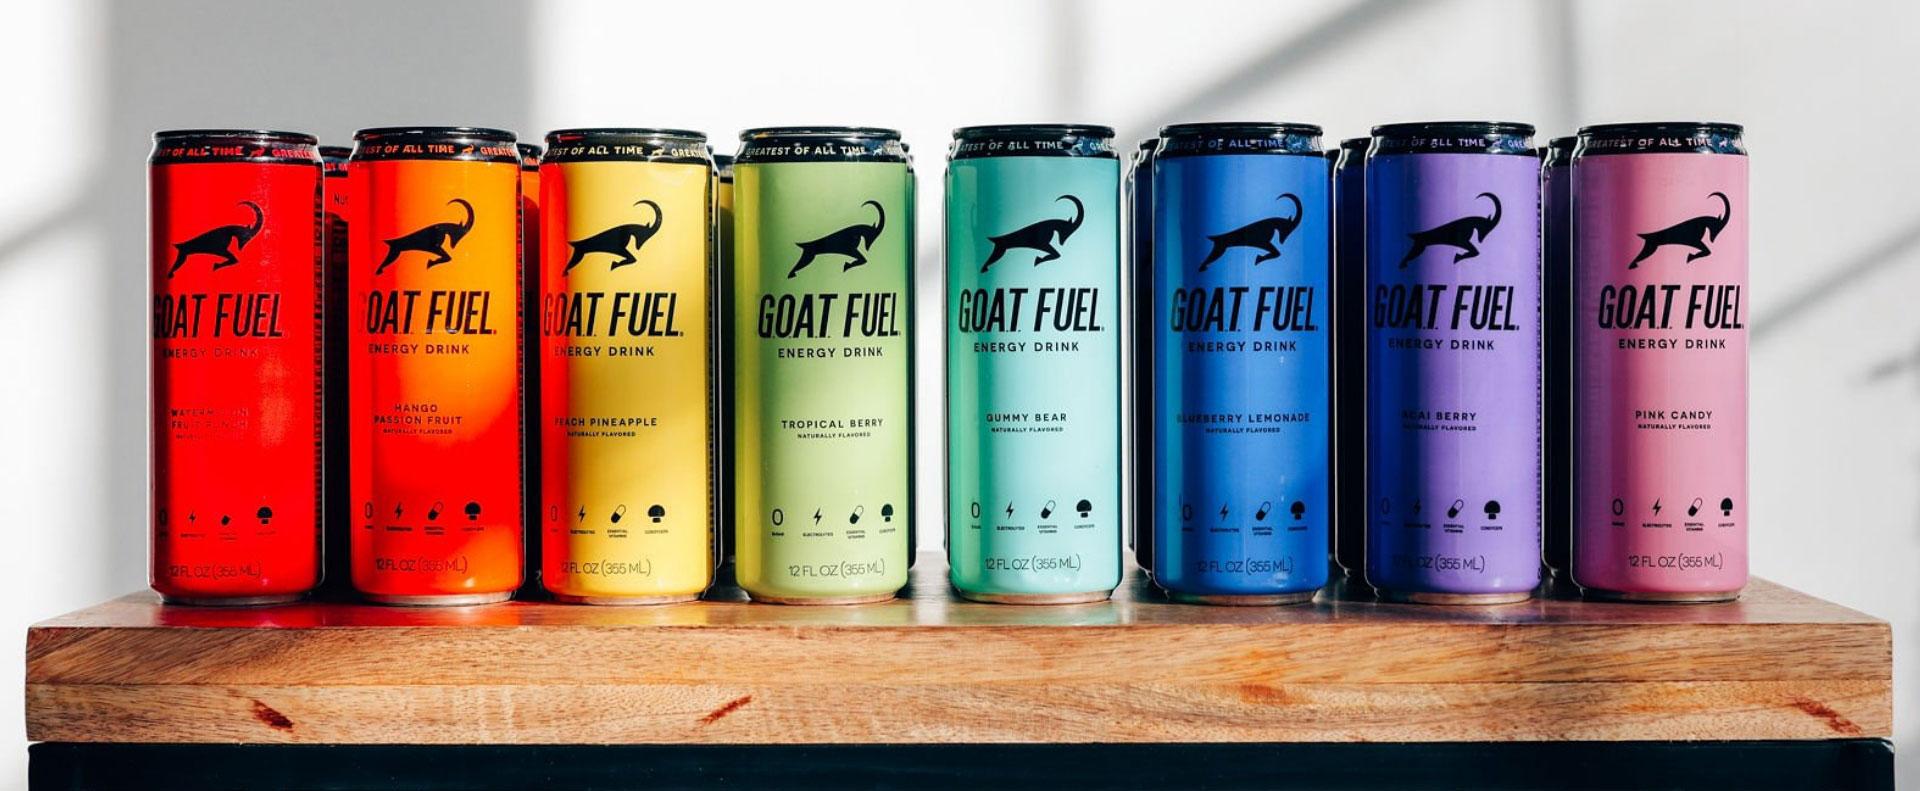 Lineout’s G.O.A.T. Fuel case study on how we increased sales and eased costs.